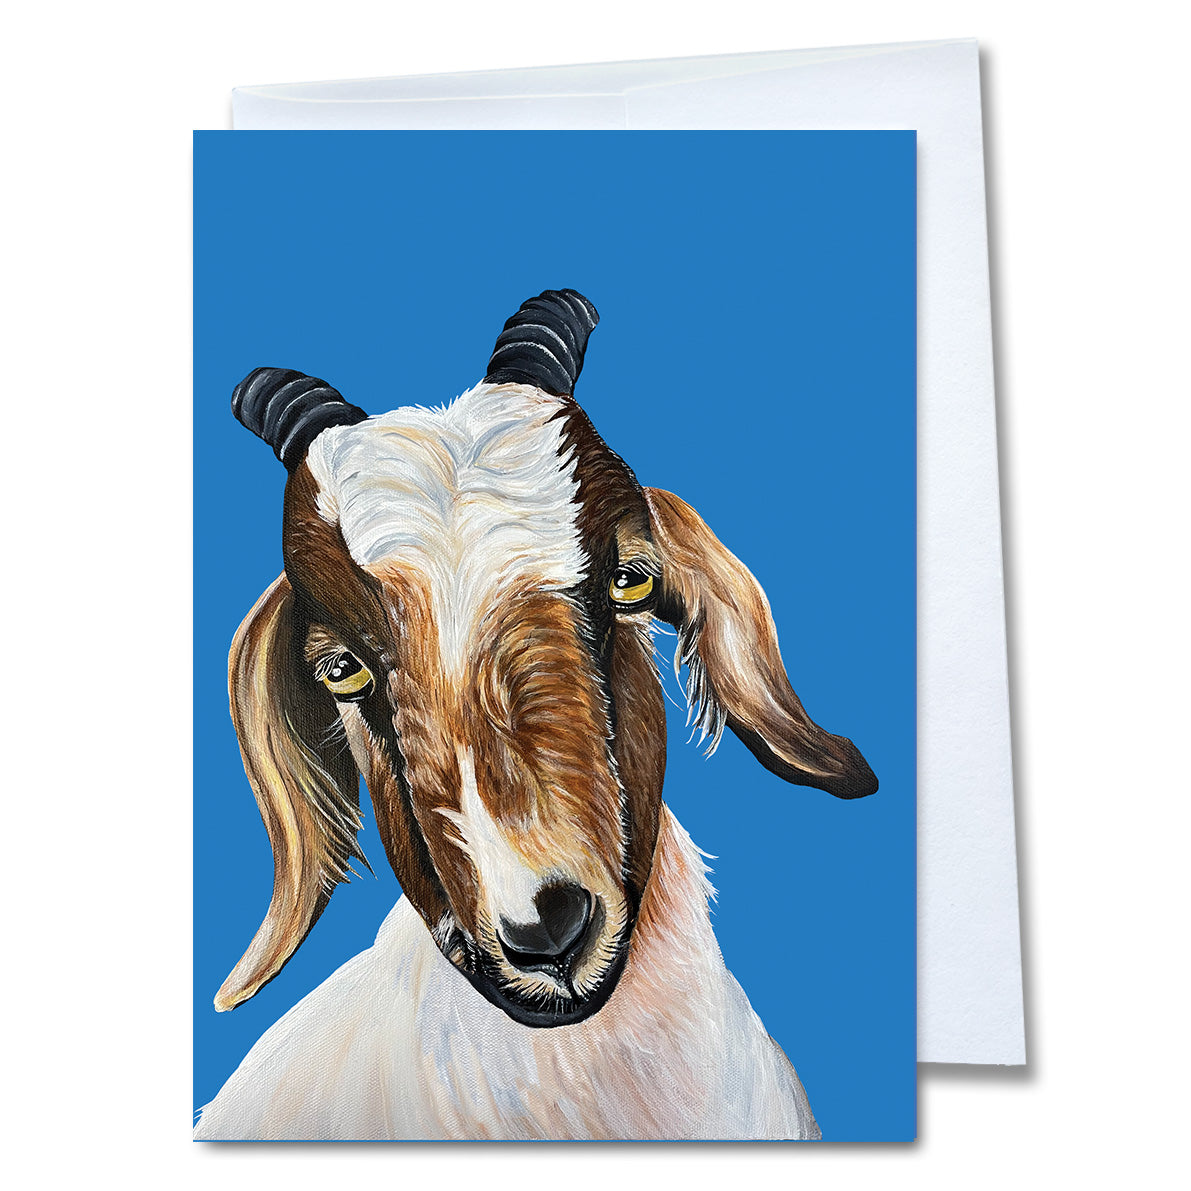 Goat Greeting Card - Ollie